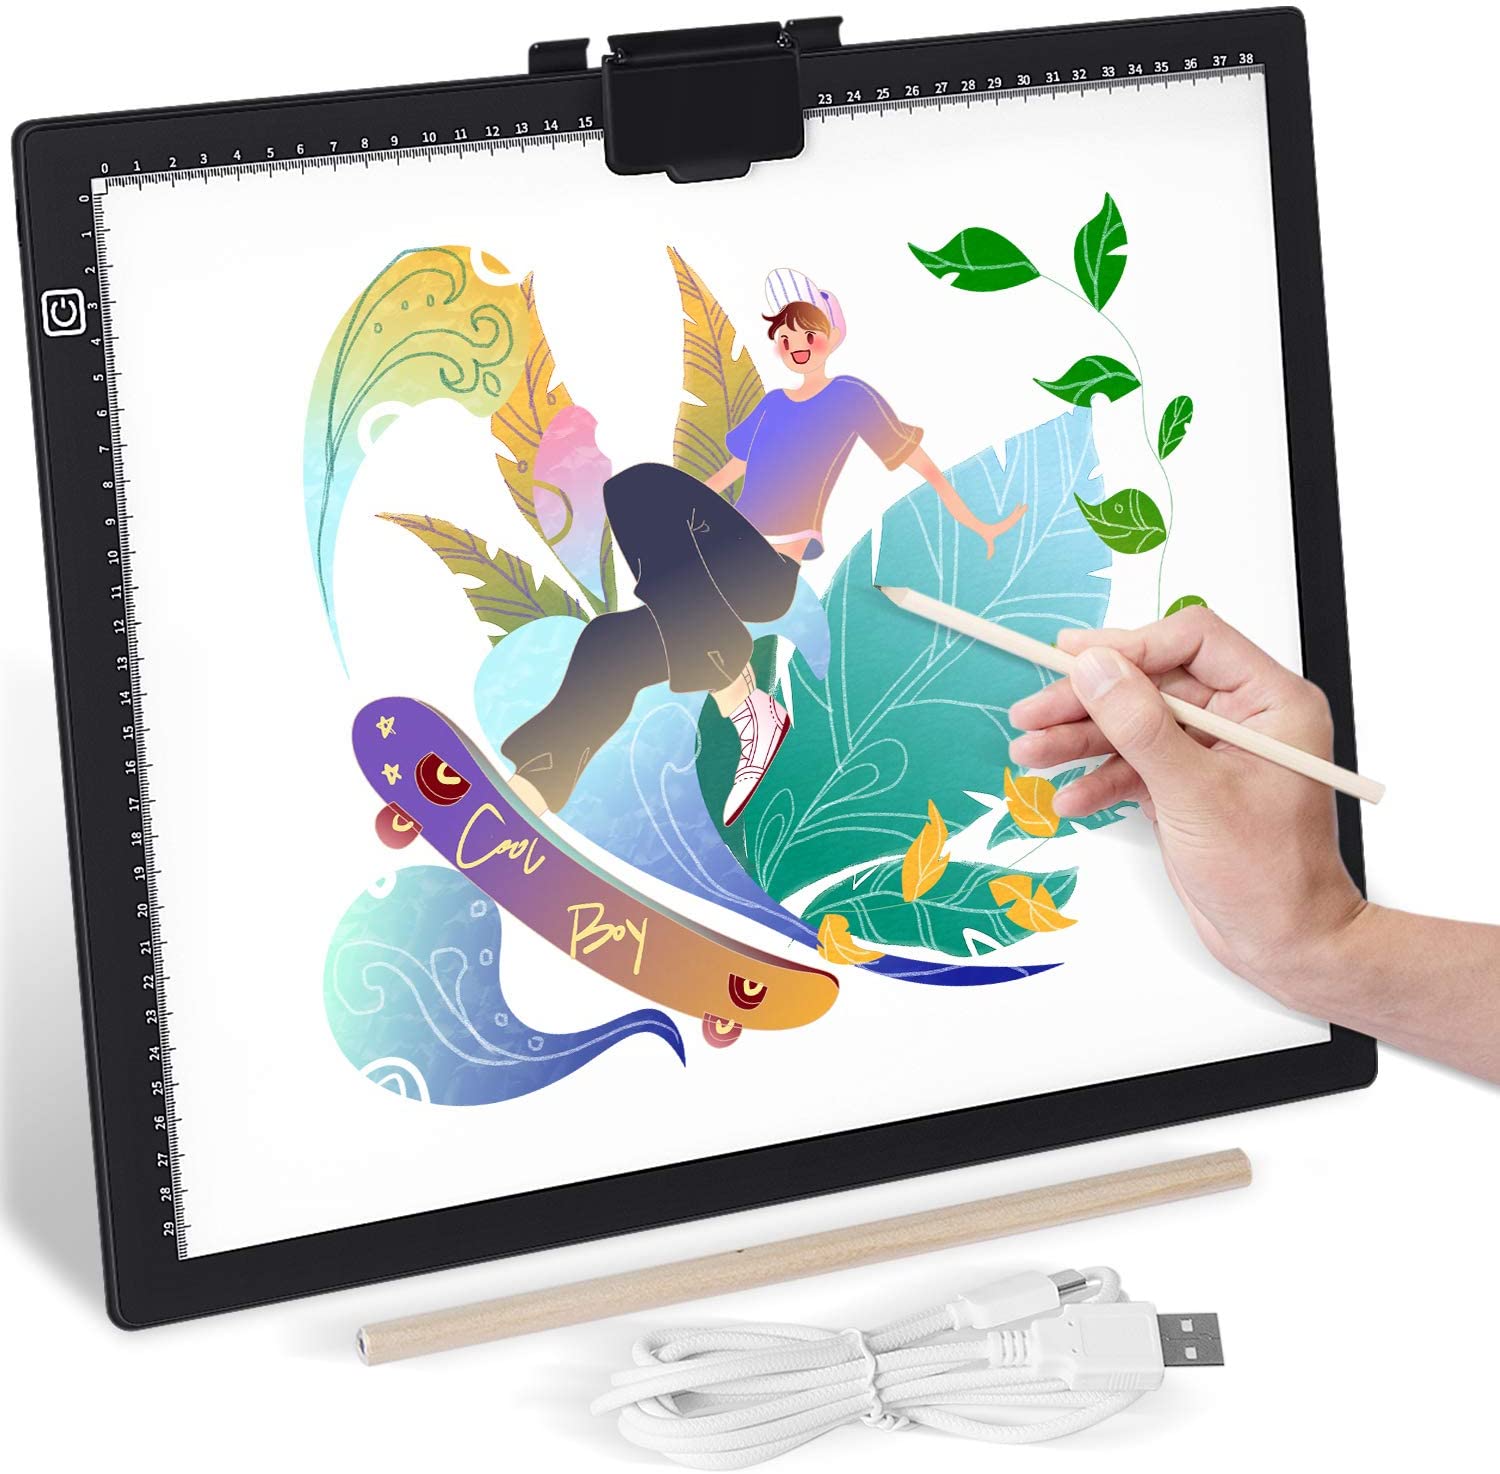 Geeetech Tracing Light Pad for Diamond Painting, Stepless Dimming